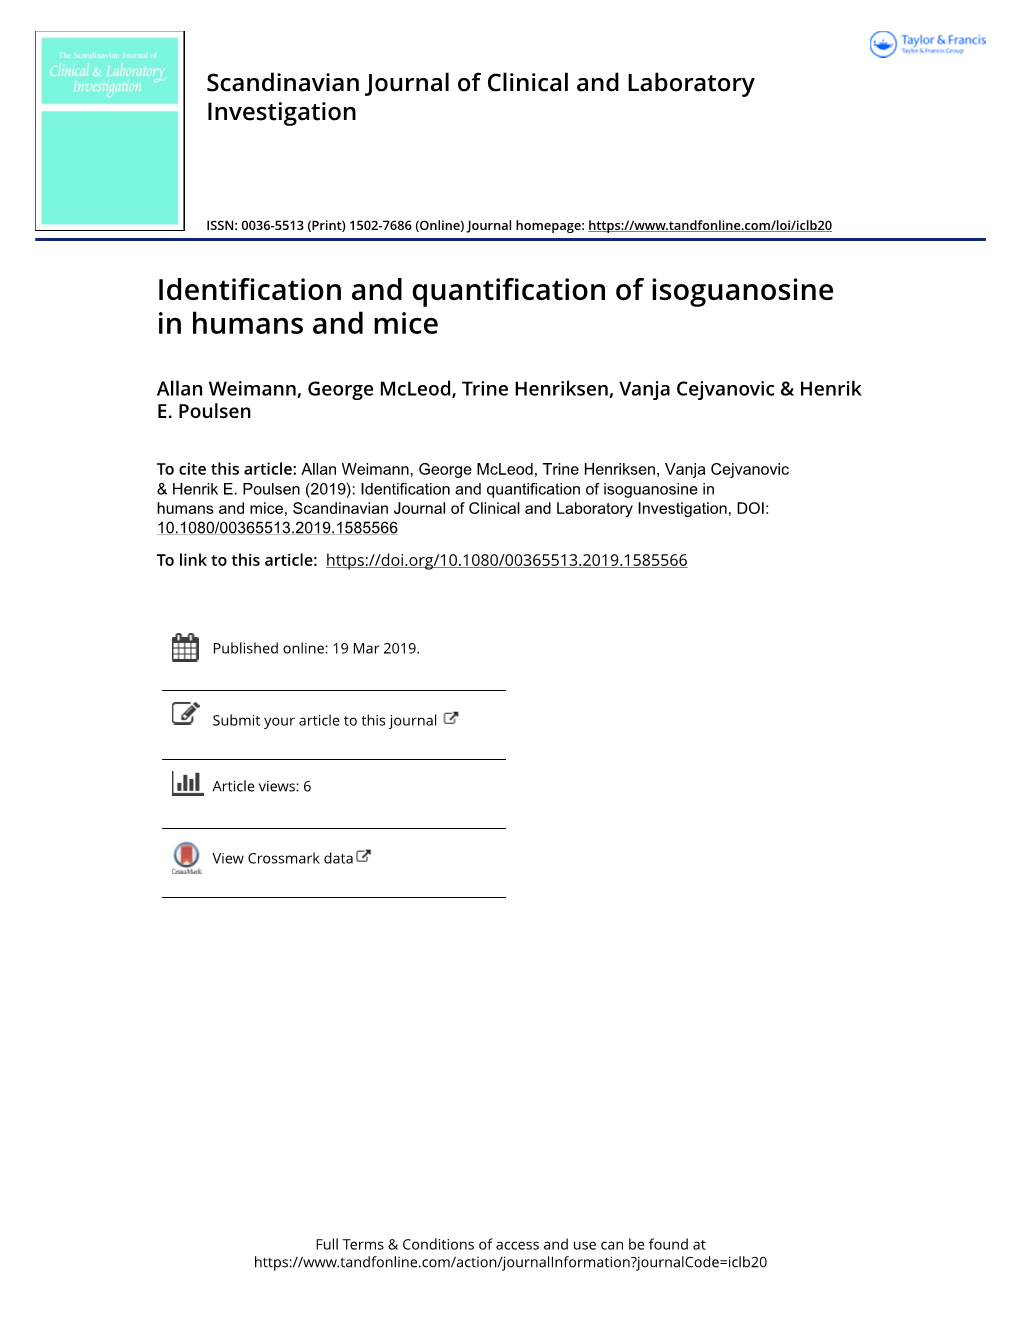 Identification and Quantification of Isoguanosine in Humans and Mice